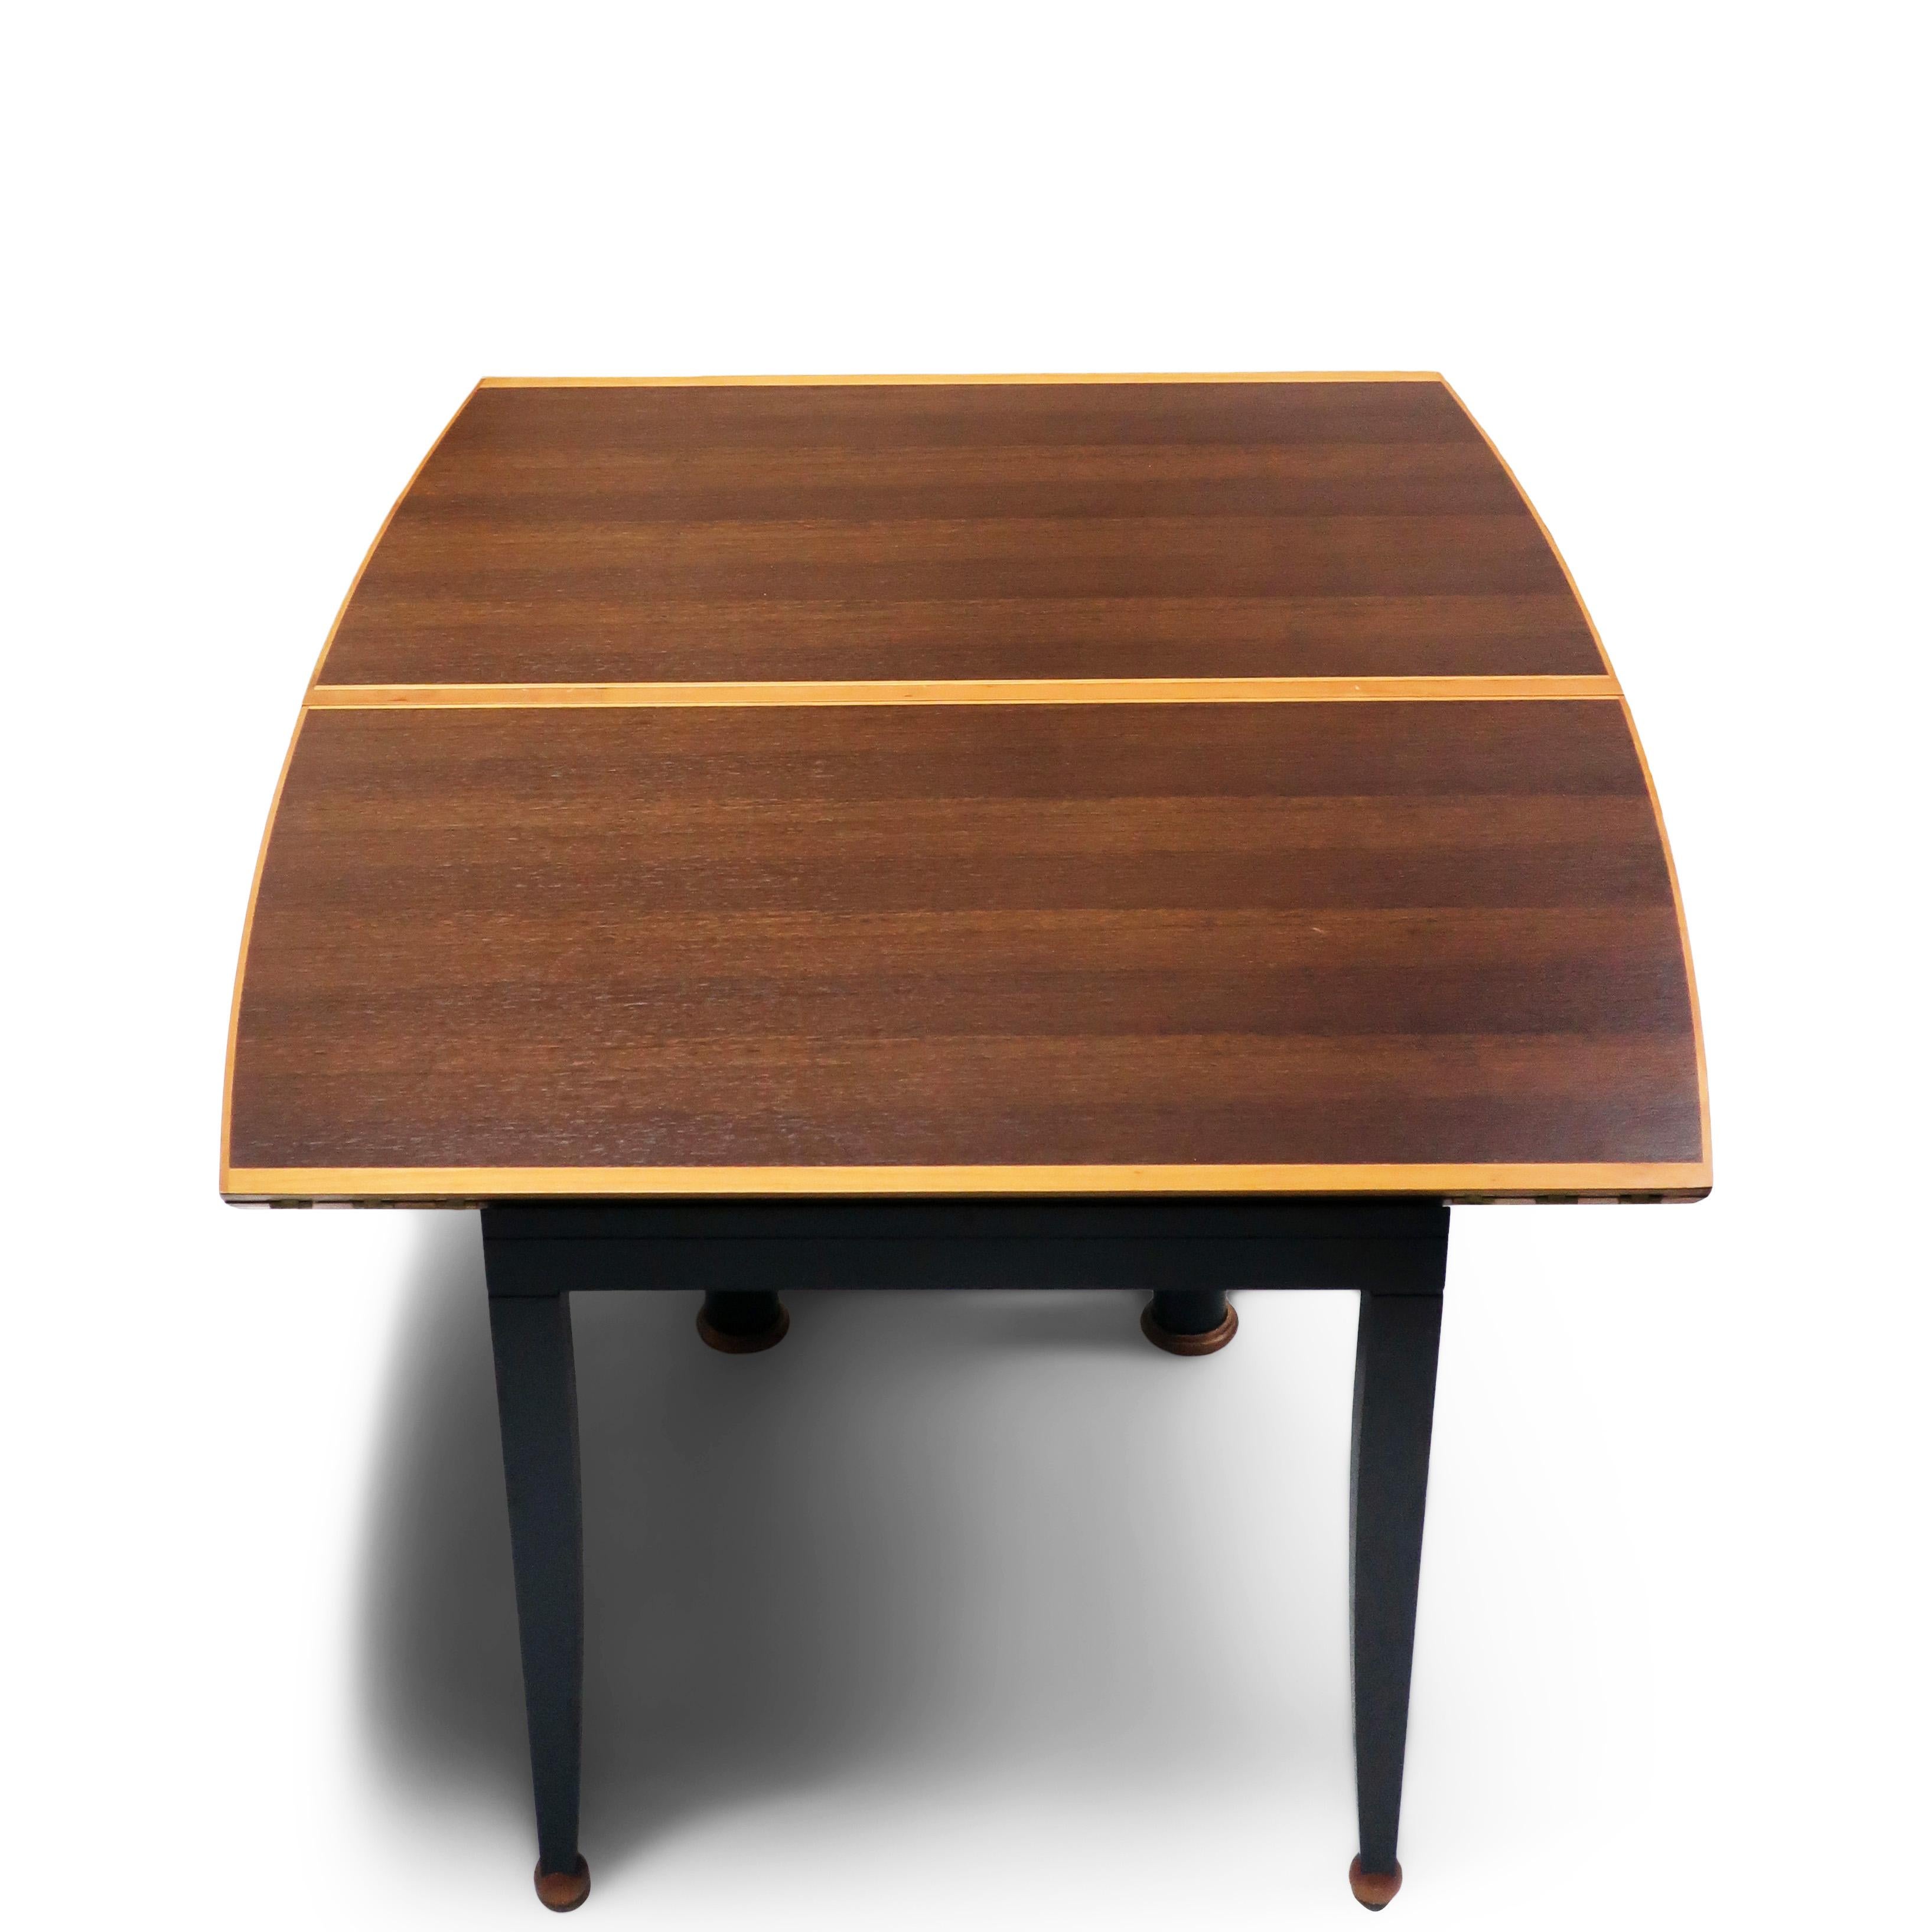 Italian Tabula Magna Dining Table by Oscar Tosquets Blanca for Driade Aleph, '1991' For Sale